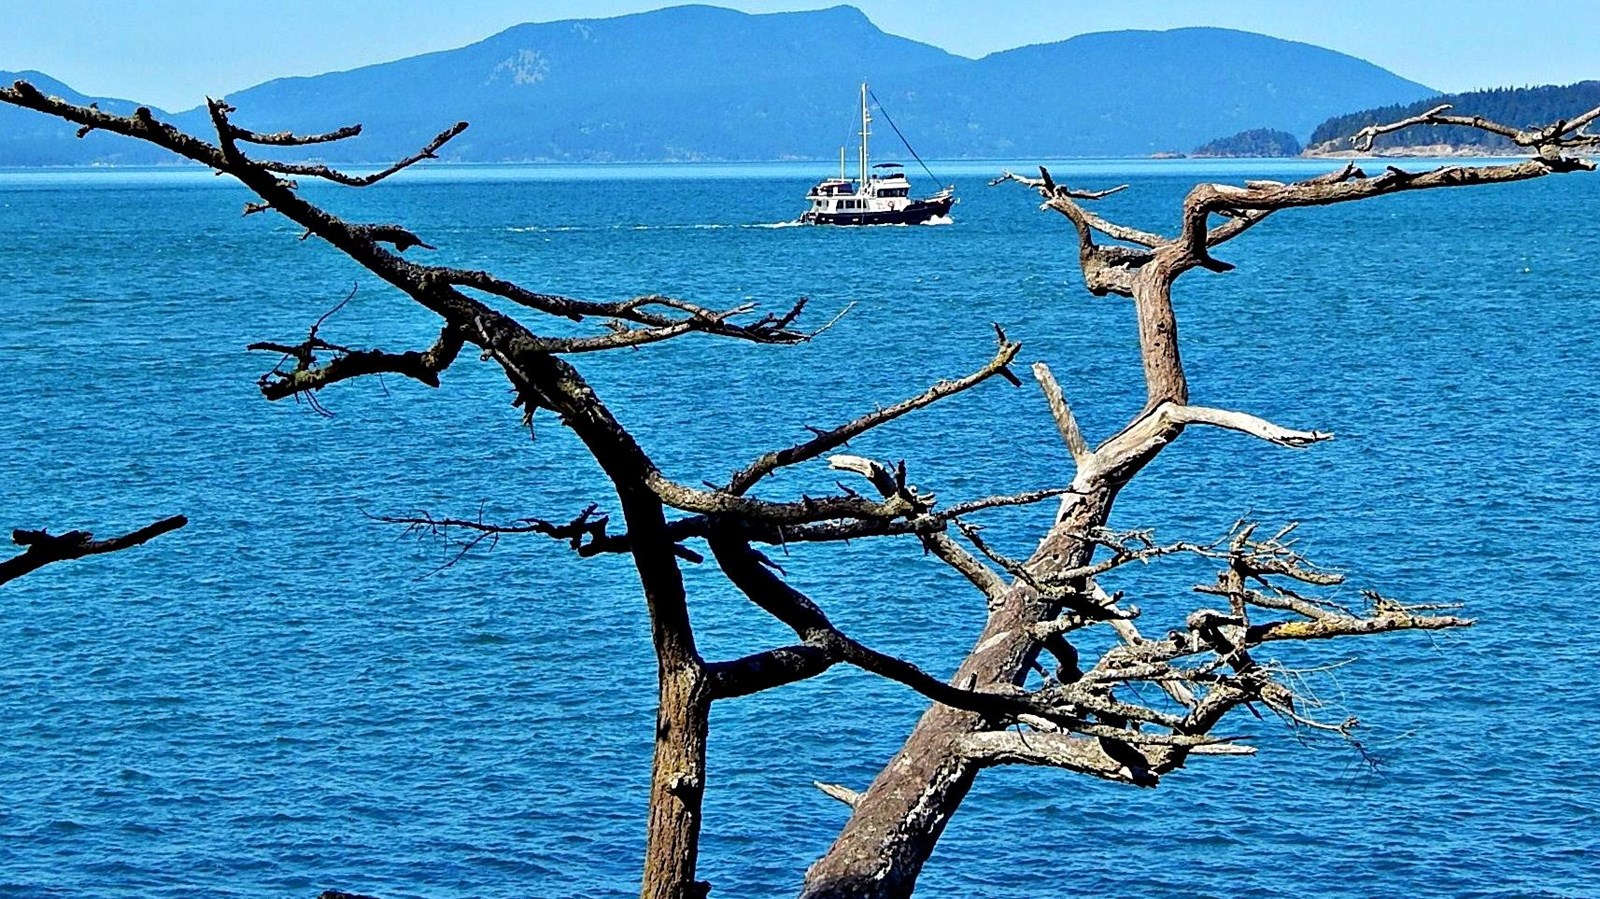 Color photograph of a body of ater with a tree in the foreground, a boat and island in the backgroun